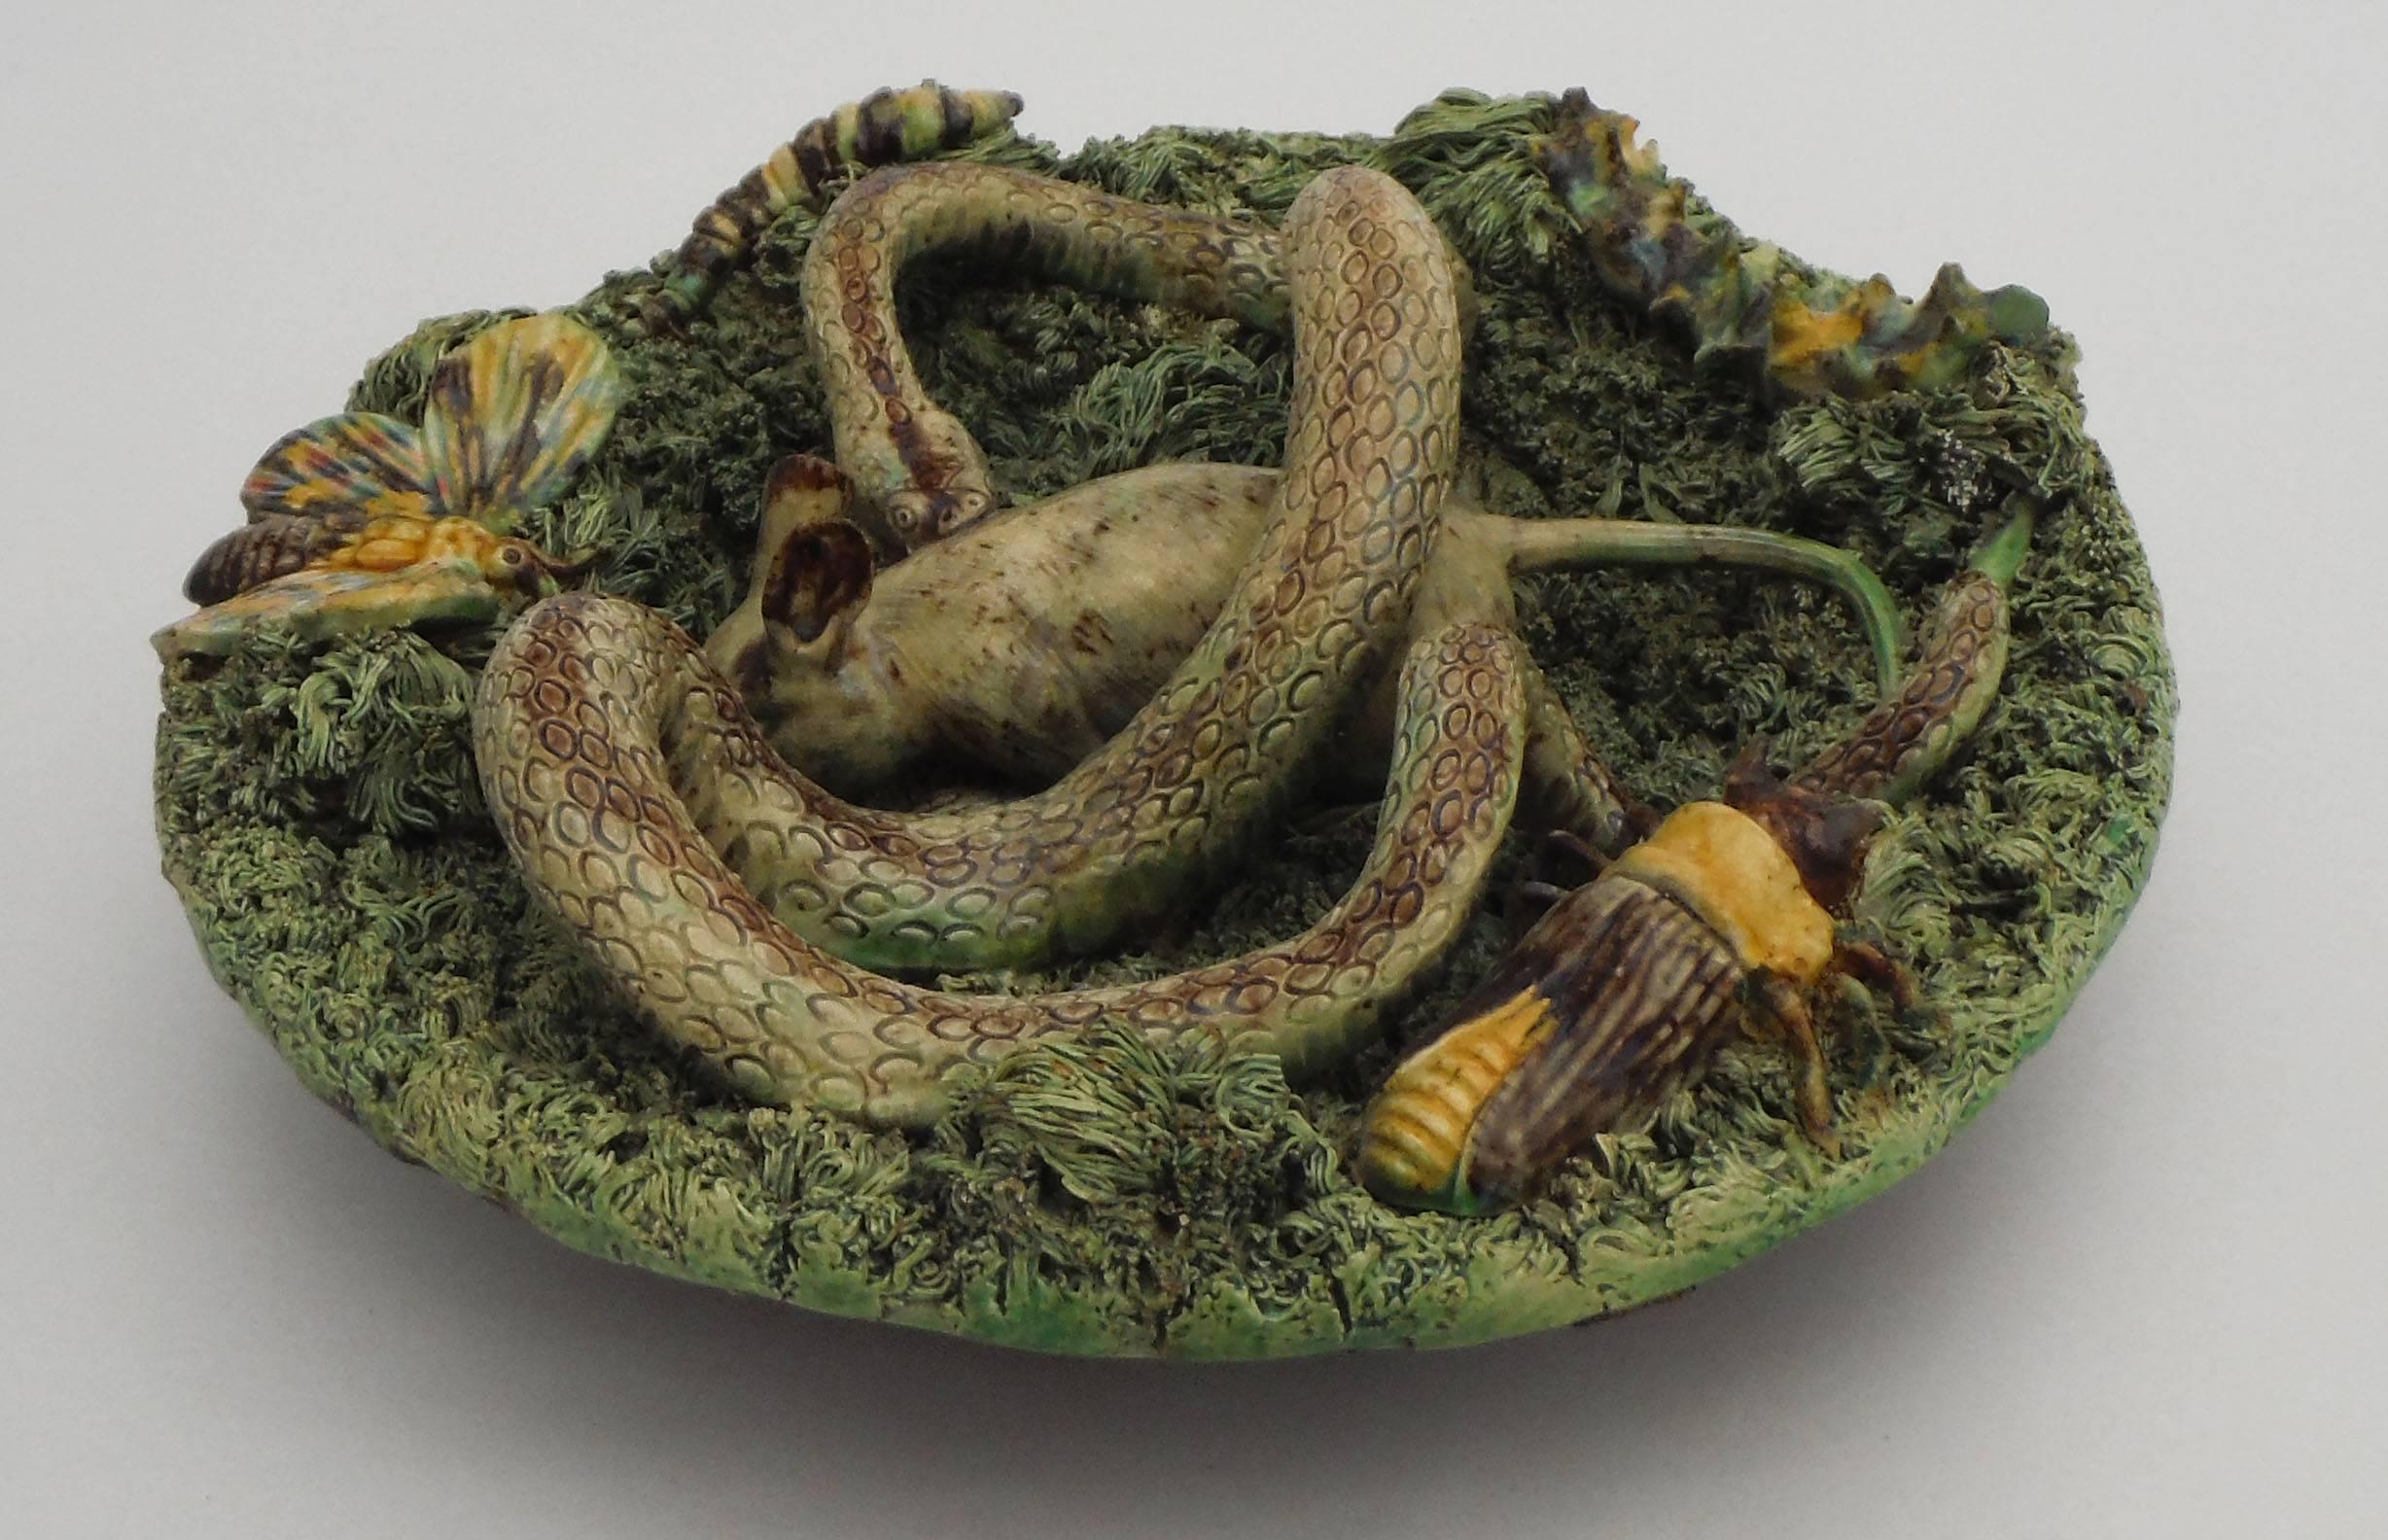 Antique Majolica Palissy Portuguese wall platter signed Jose Alves Cunha, very unusual piece with a rat bitten by a large snake, caterpillar, butterfly and worm, circa 1880.